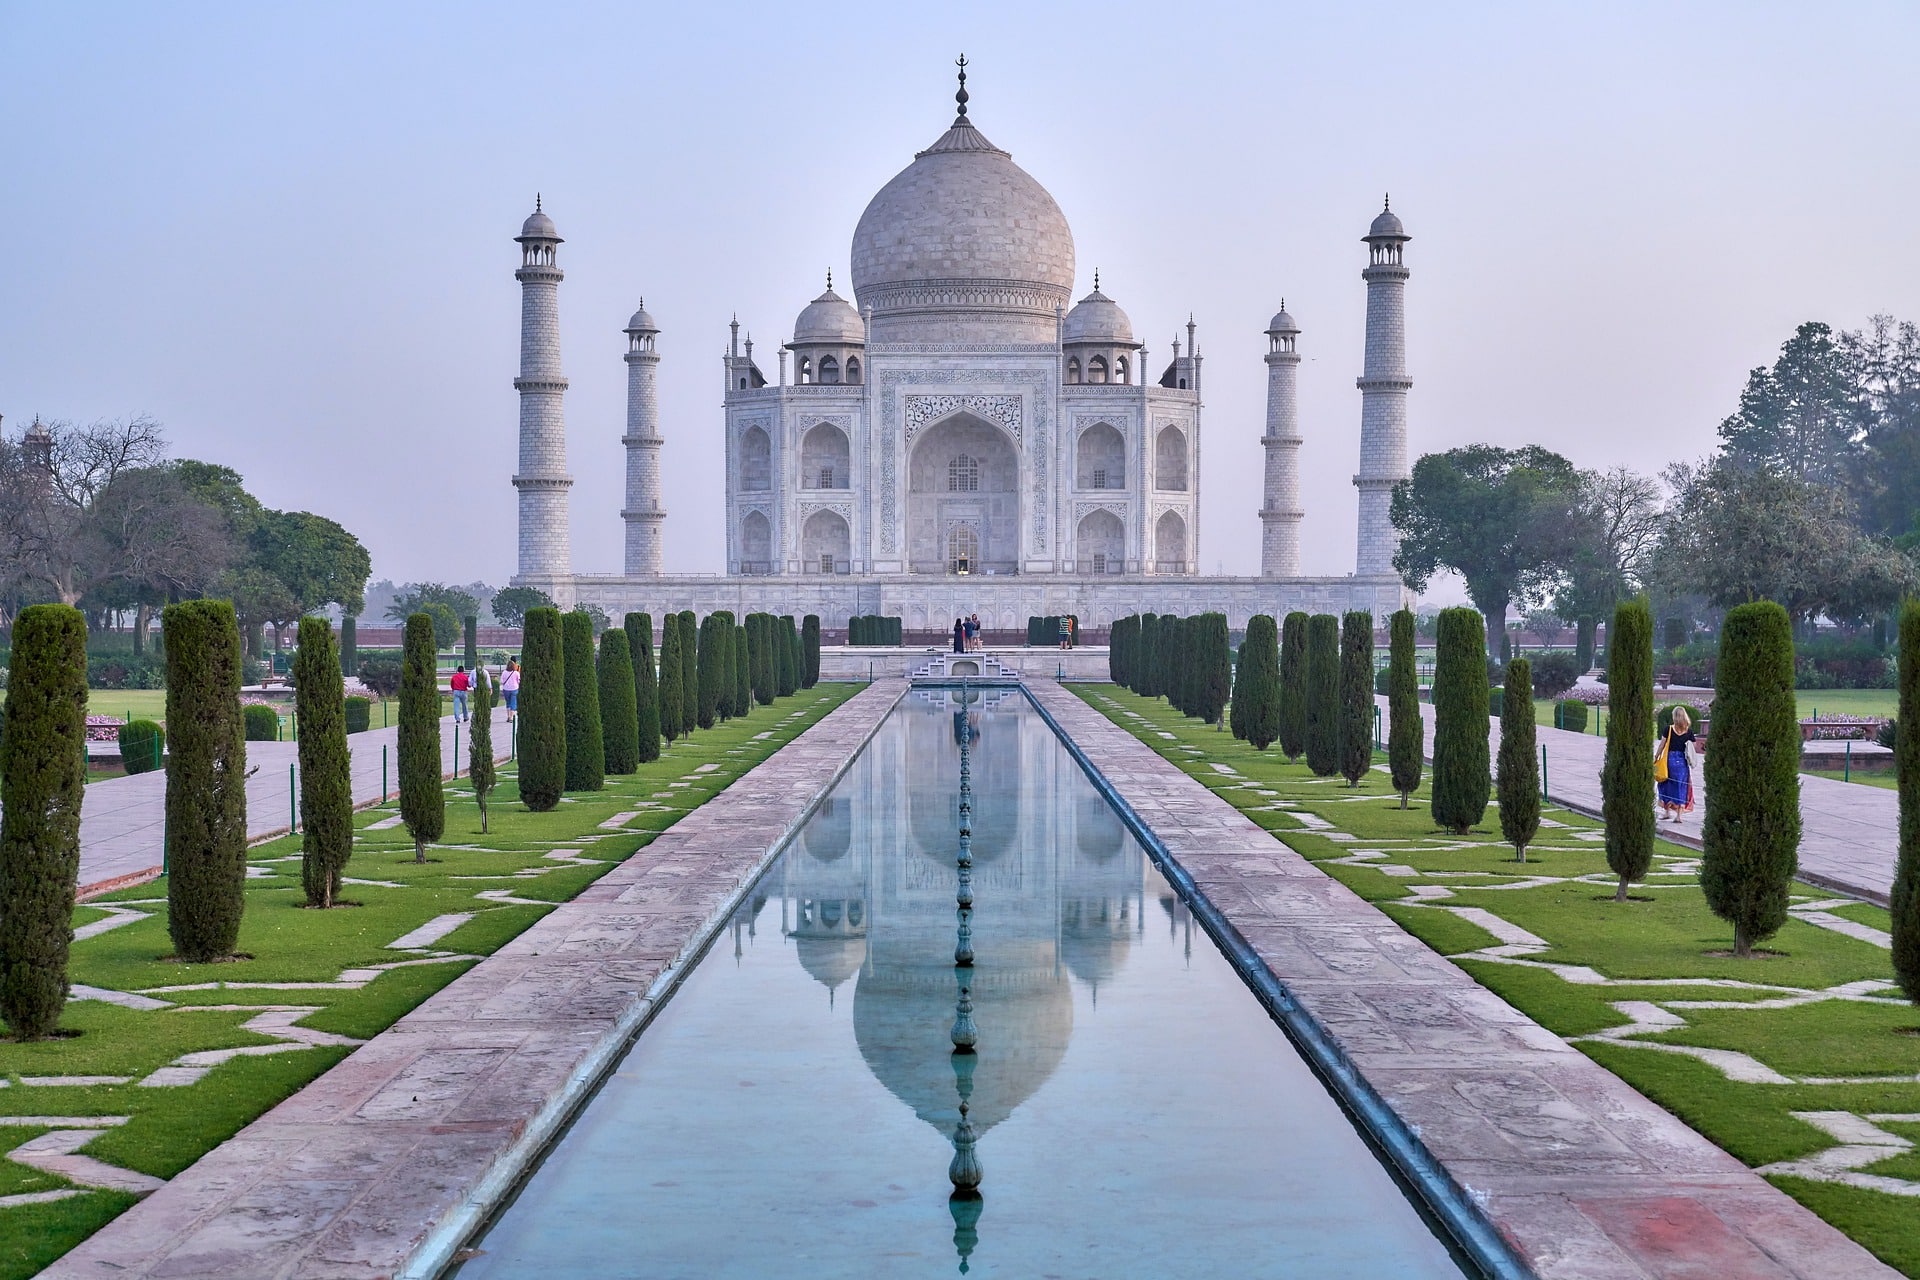 The seven wonders of the world - A picture of Taj Mahal